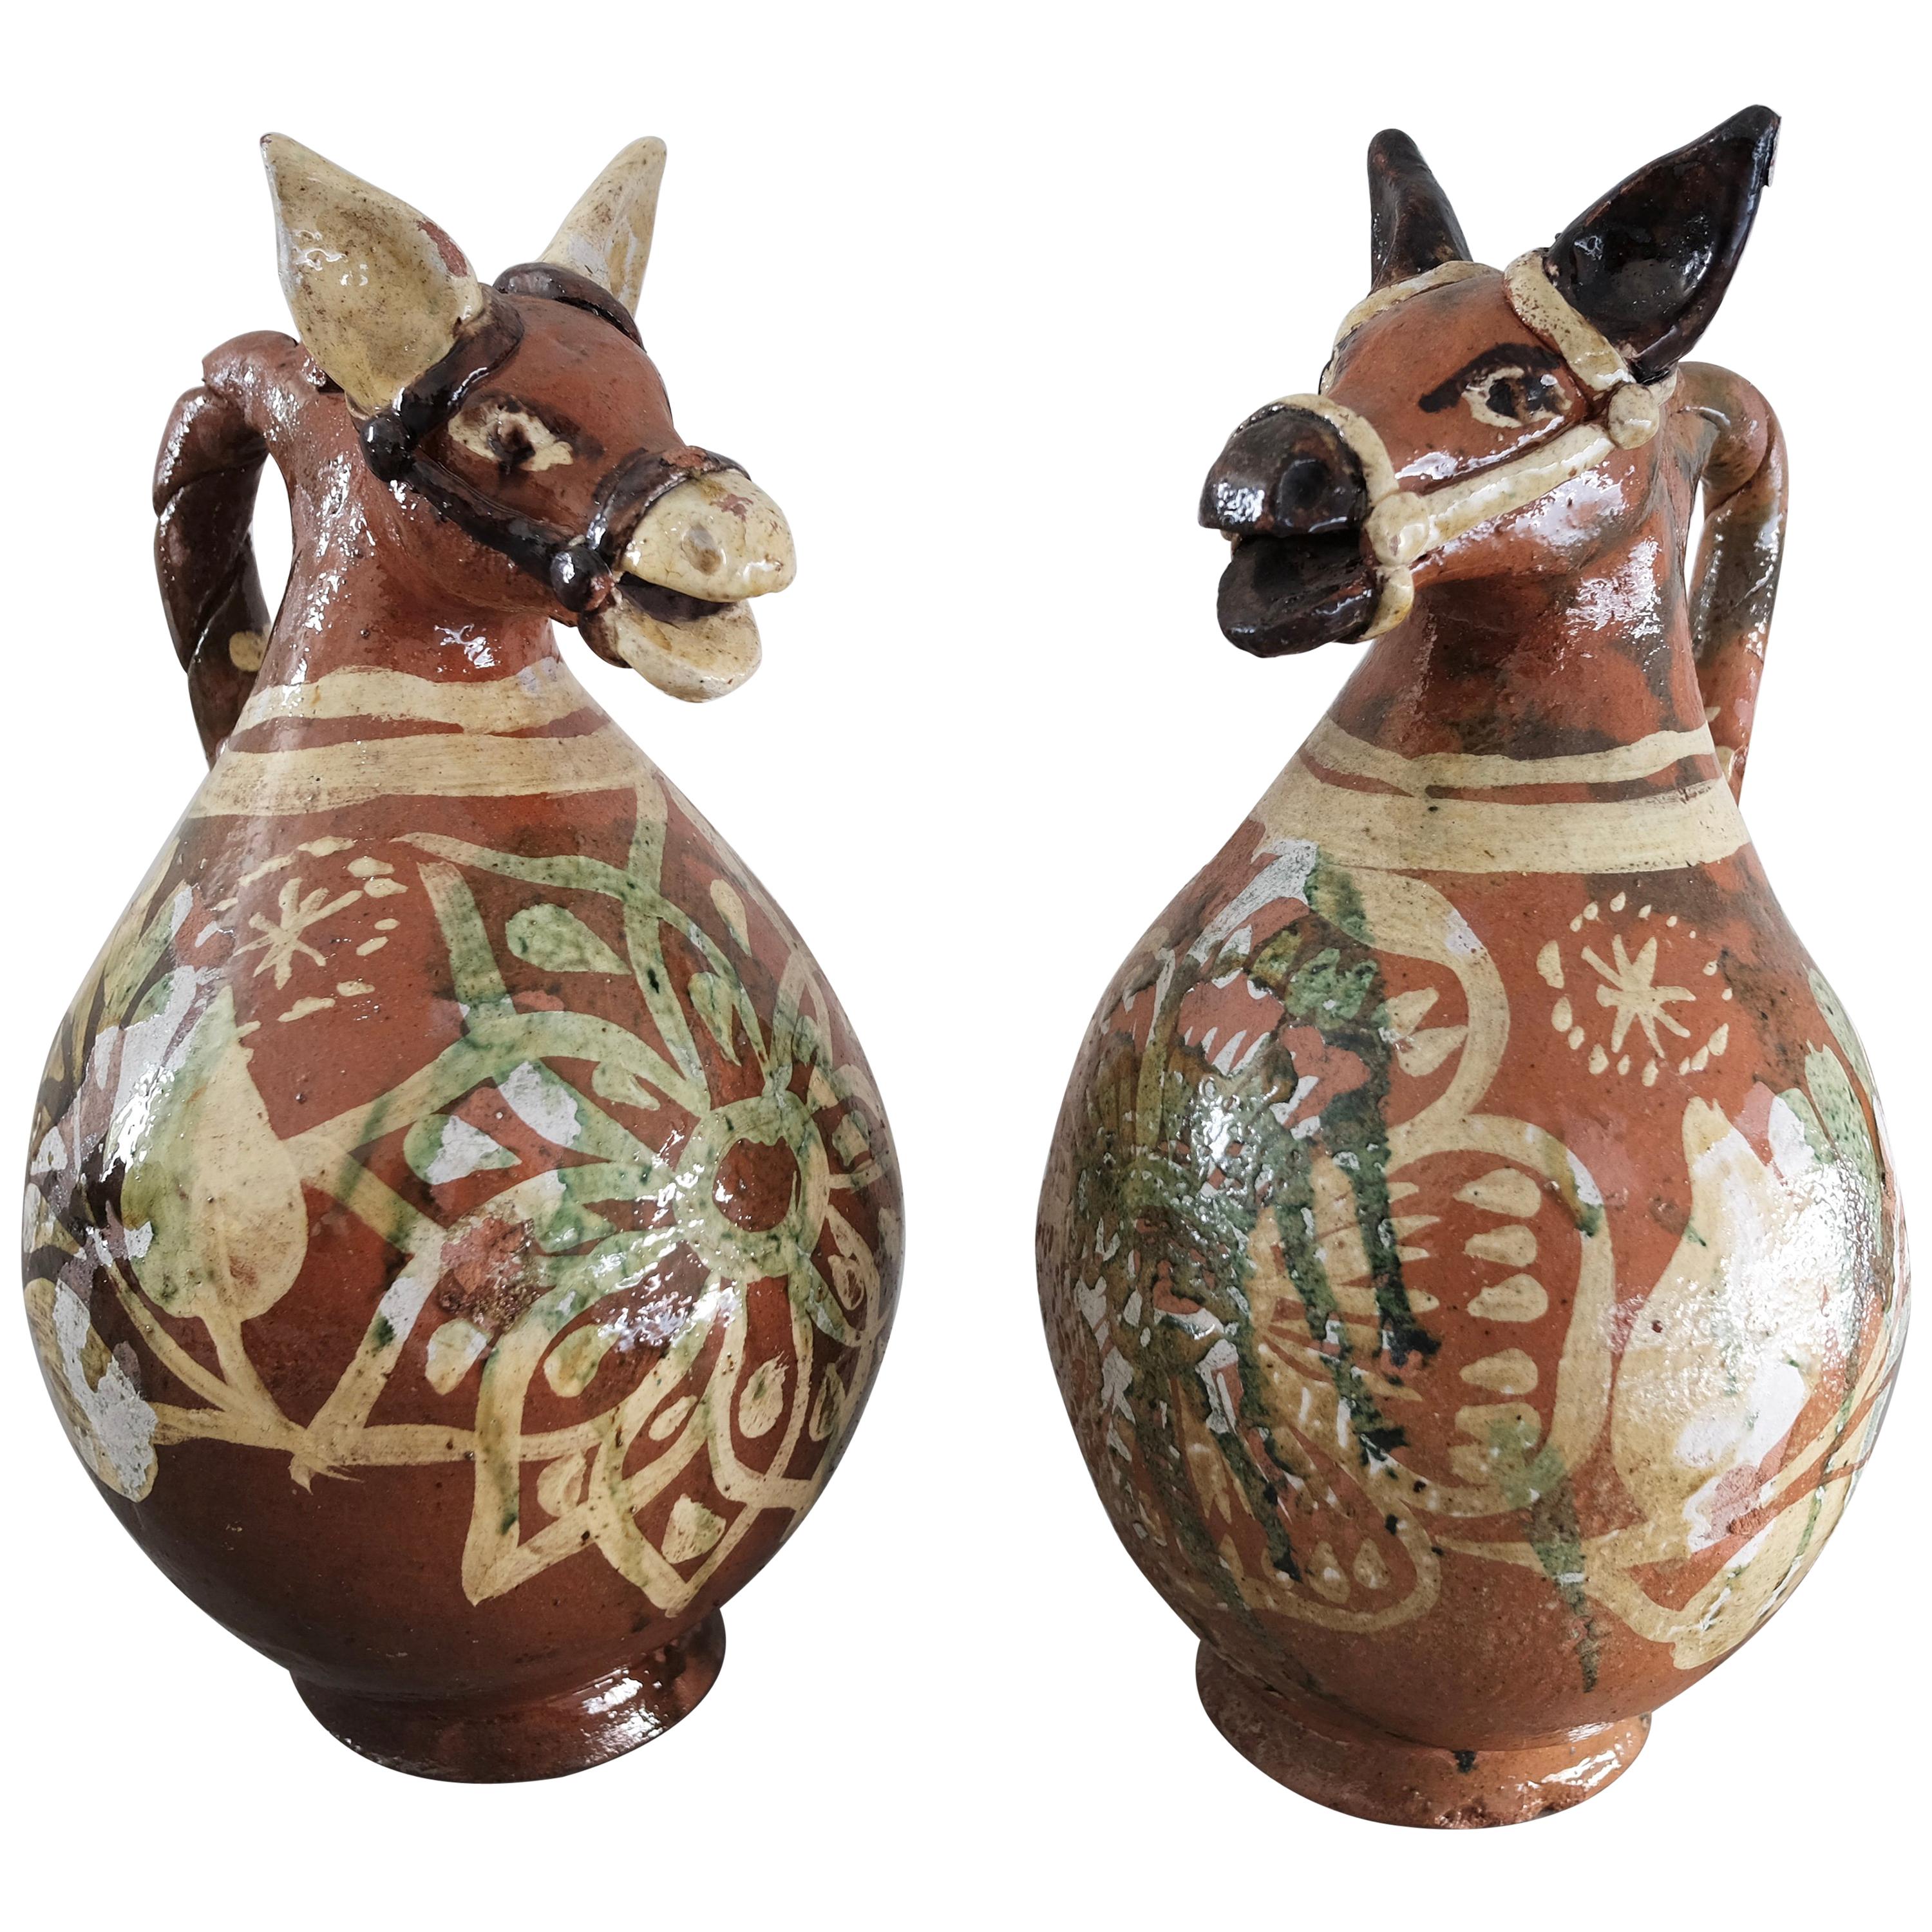 Ceramic Horse Pitchers from Metepec, State of Mexico, 1980s